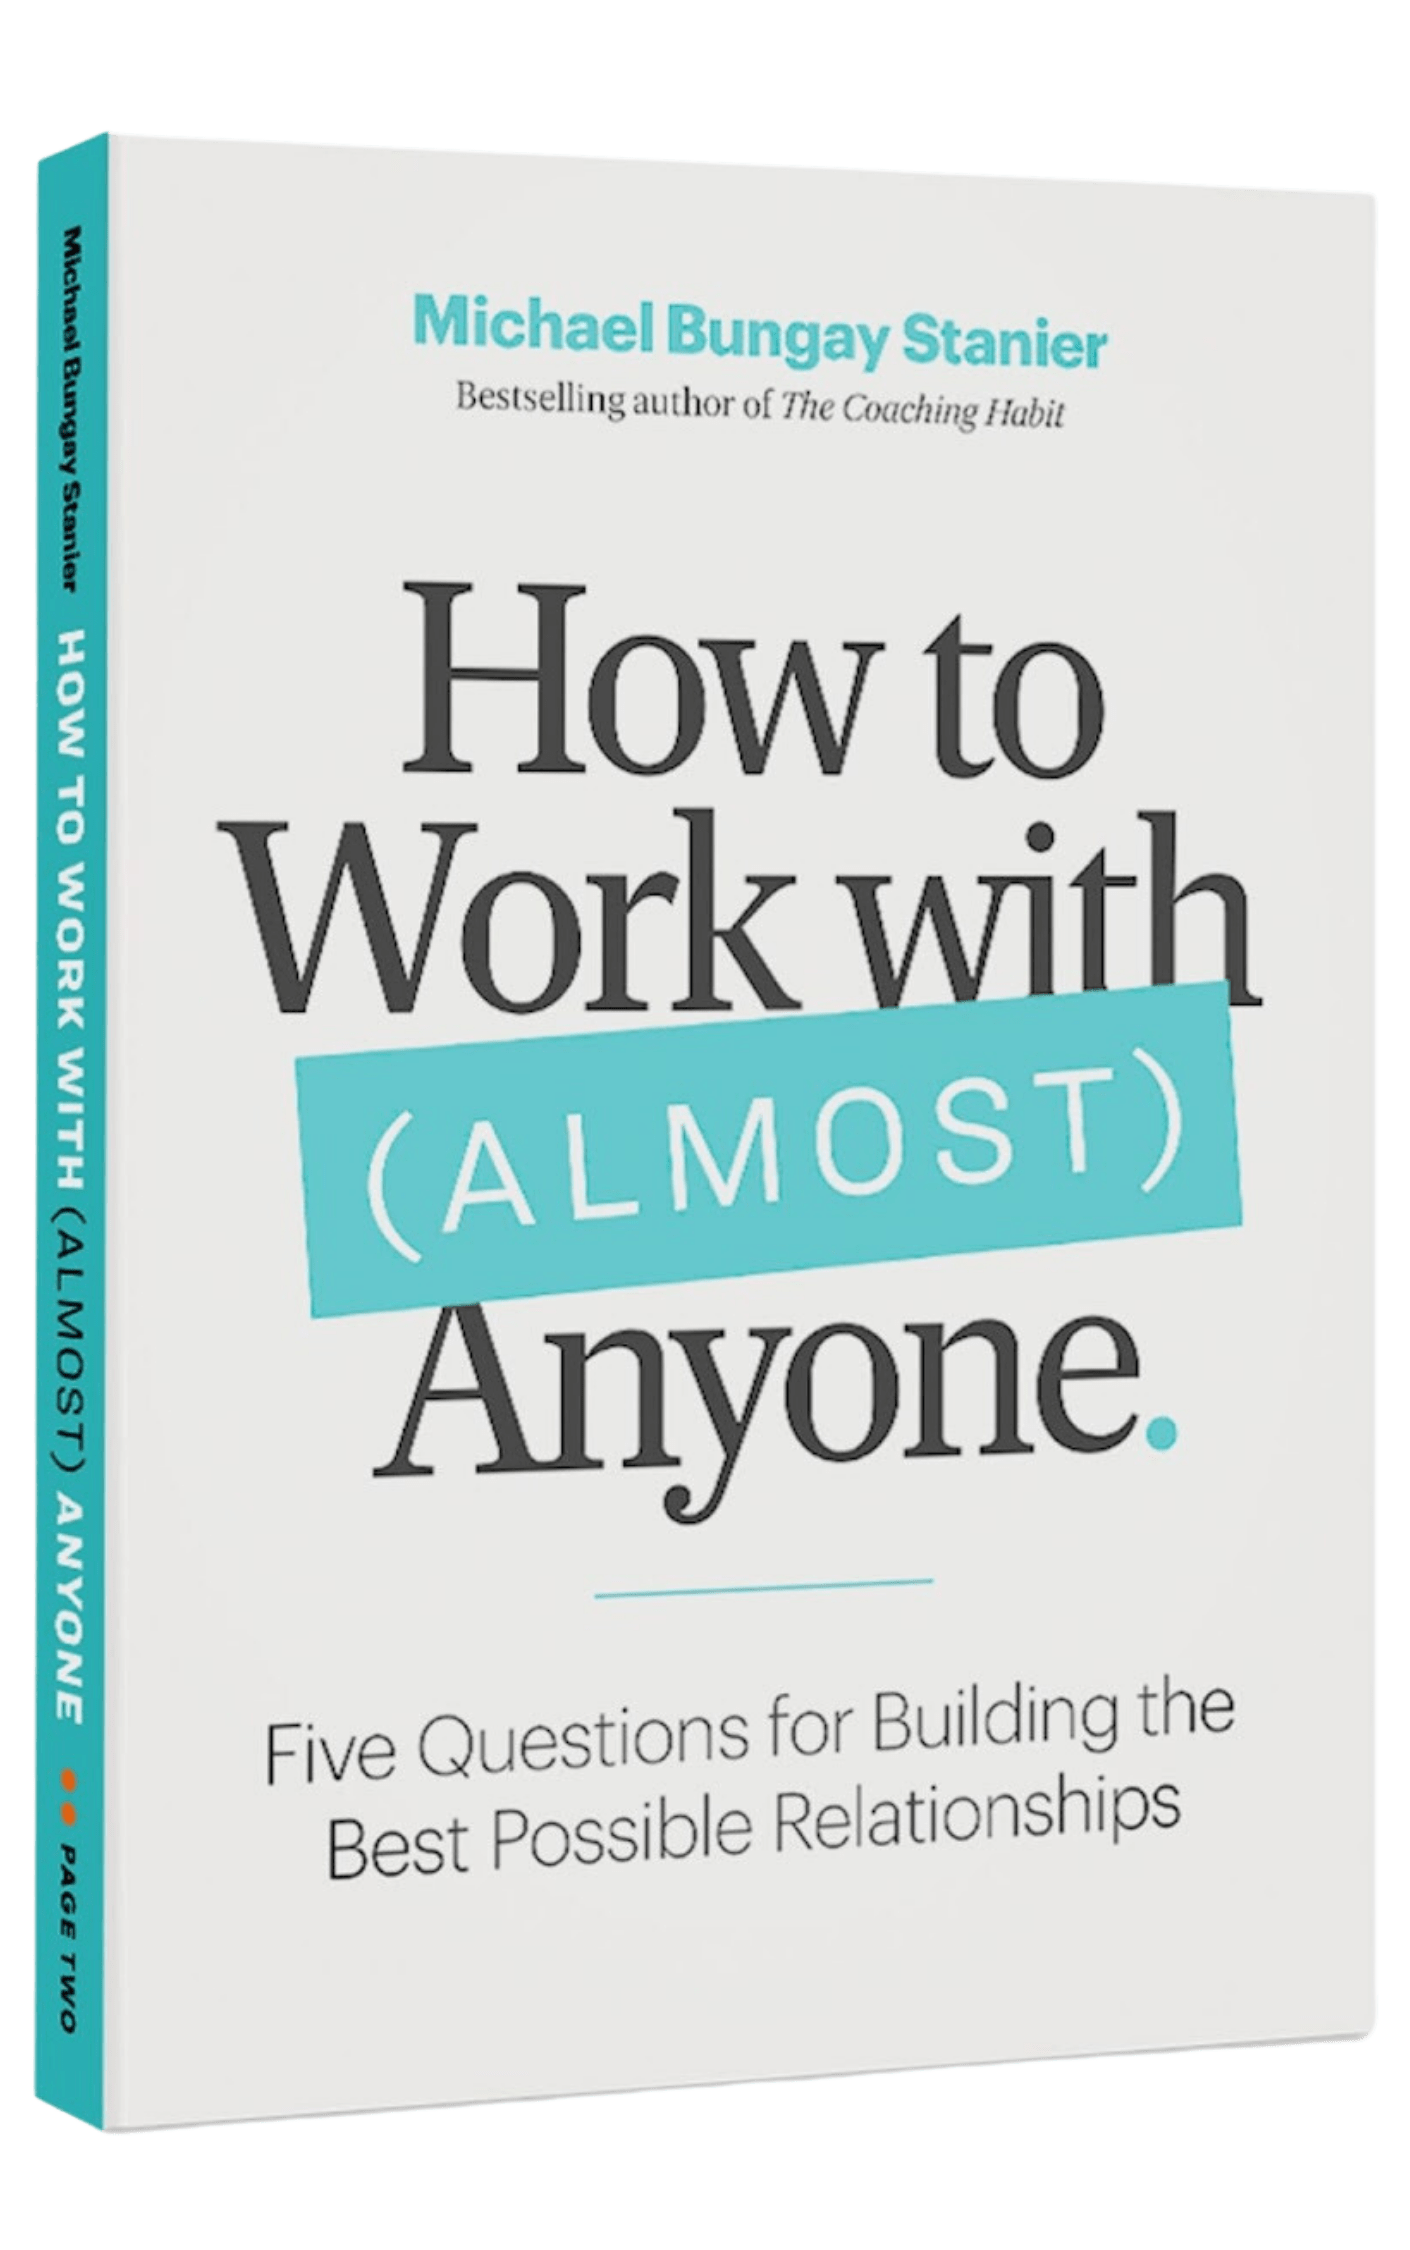 Cover of the book 'How to Work with (Almost) Anyone' by Michael Bungay Stanier